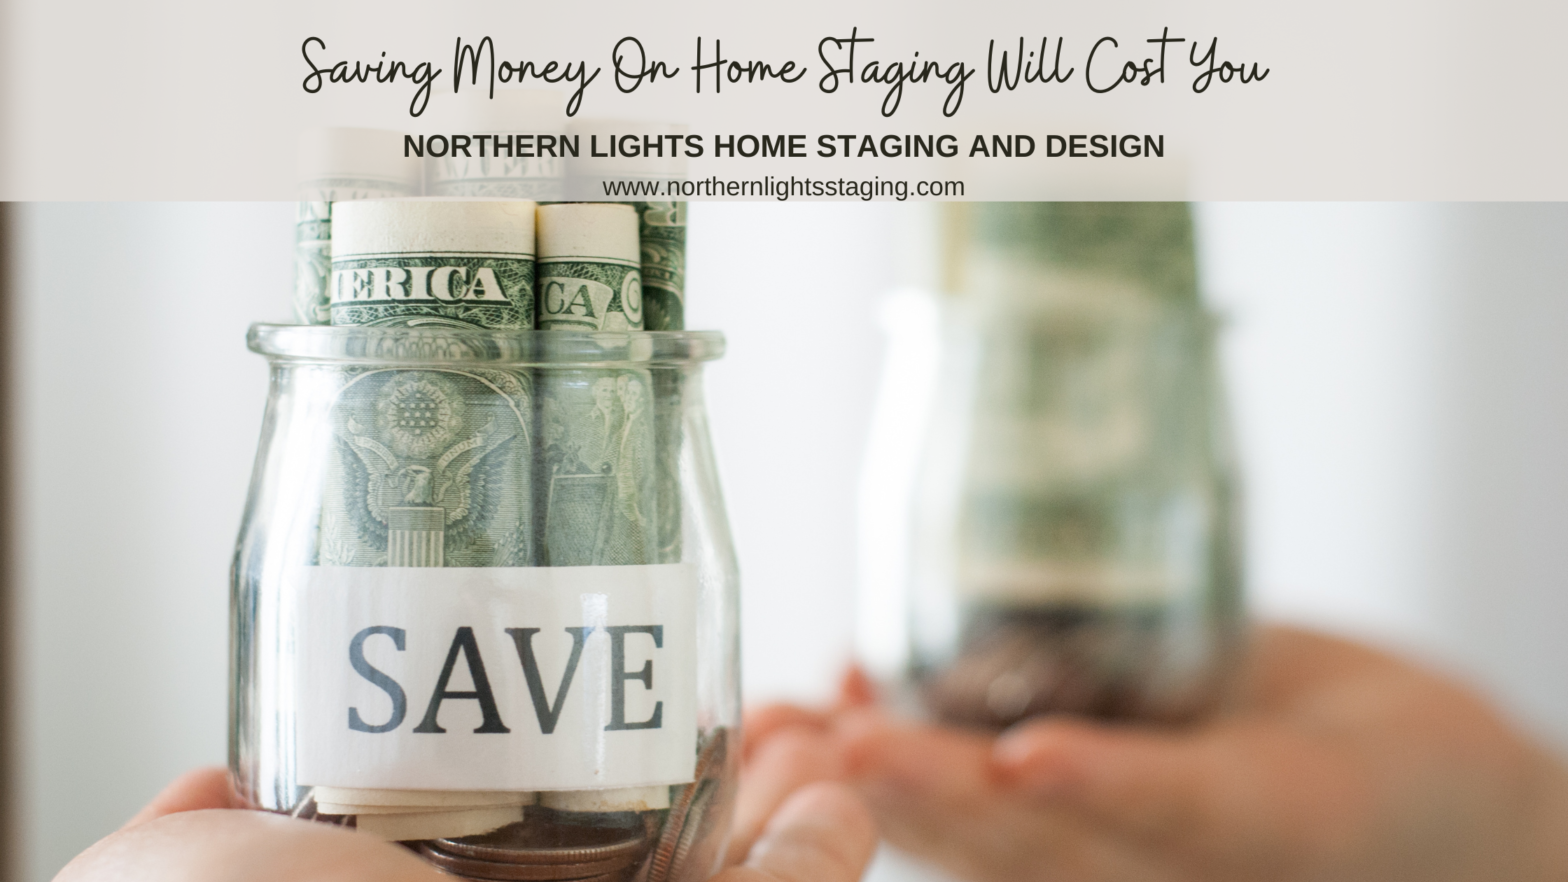 Saving Money on Home Staging will Cost You.